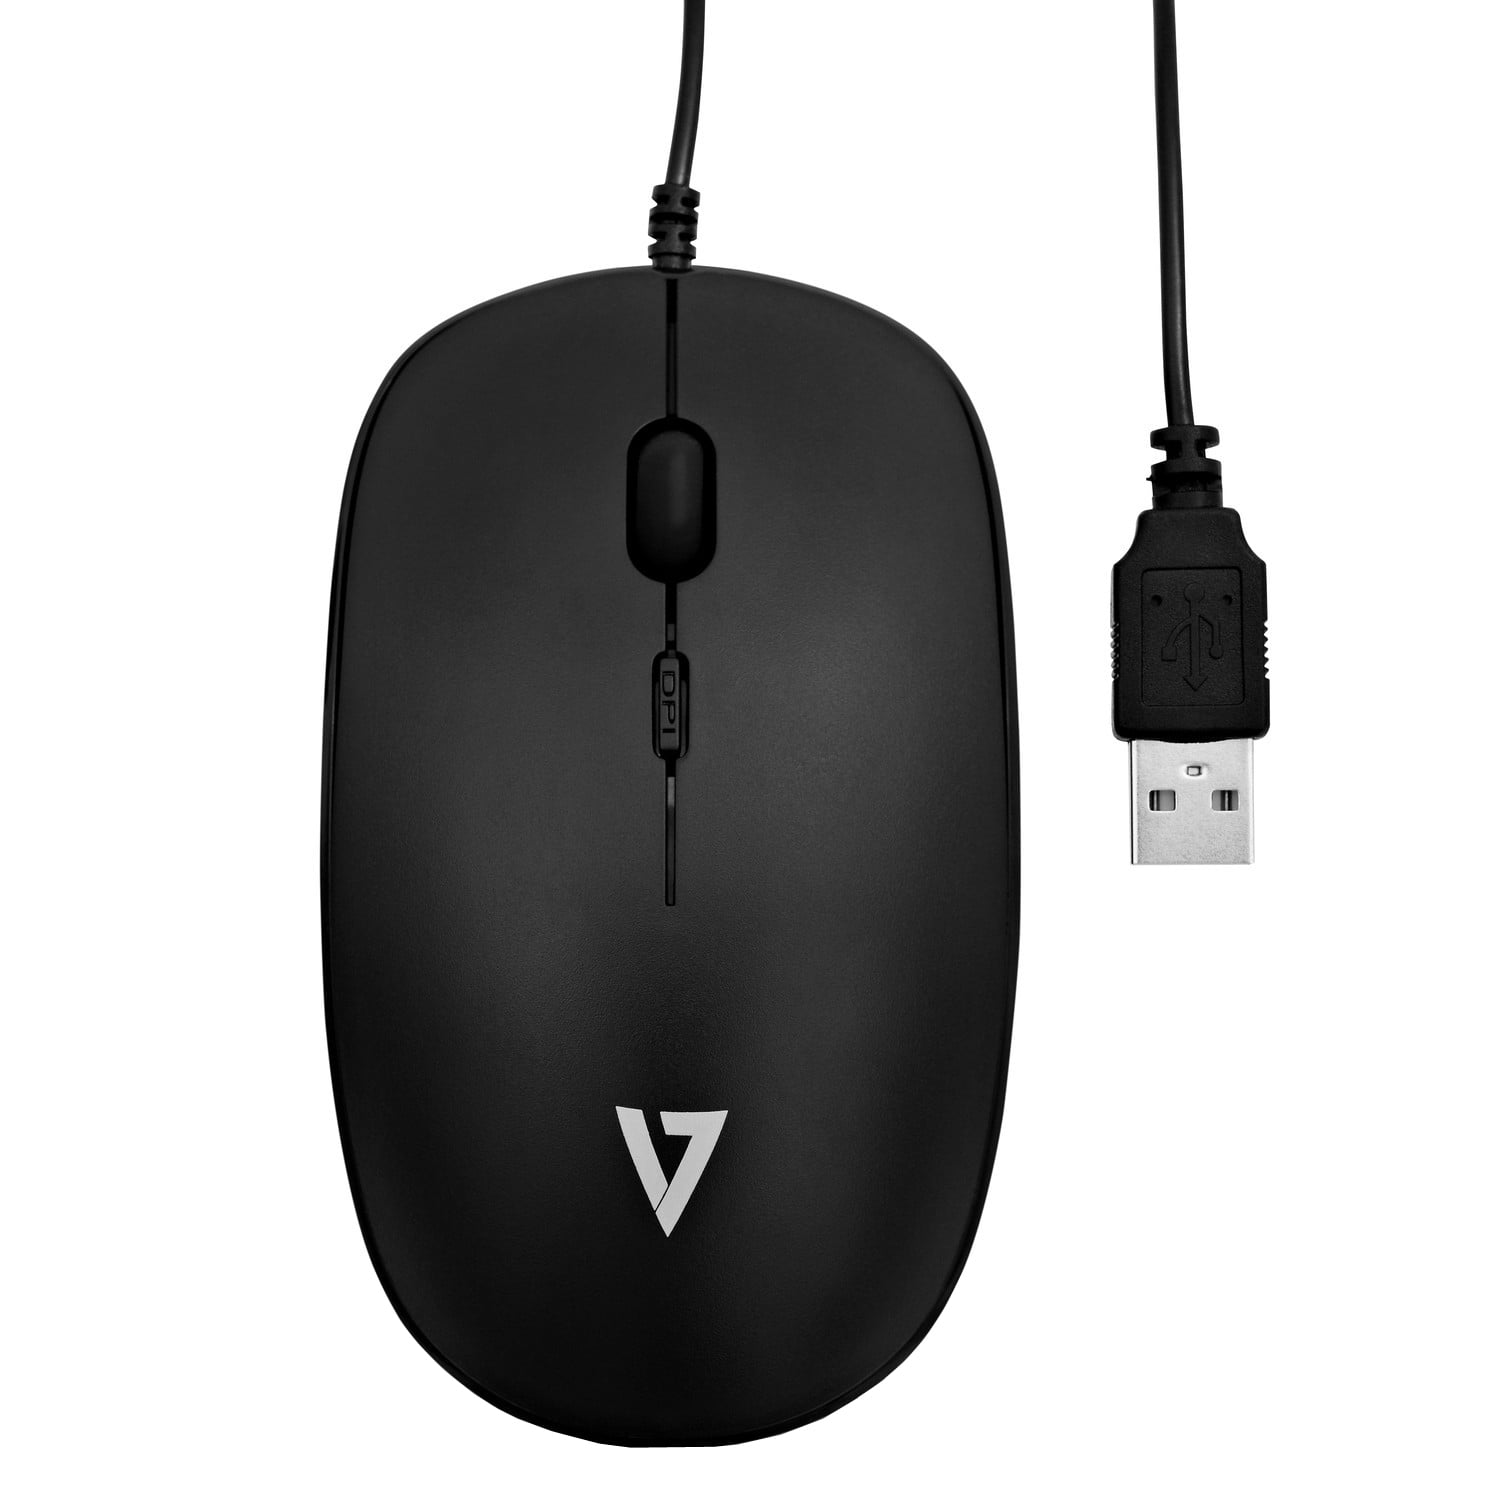 yan USB Wired Optical Mouse with Cord Scroll Wheel for Desktop Laptop Mac Windows PC